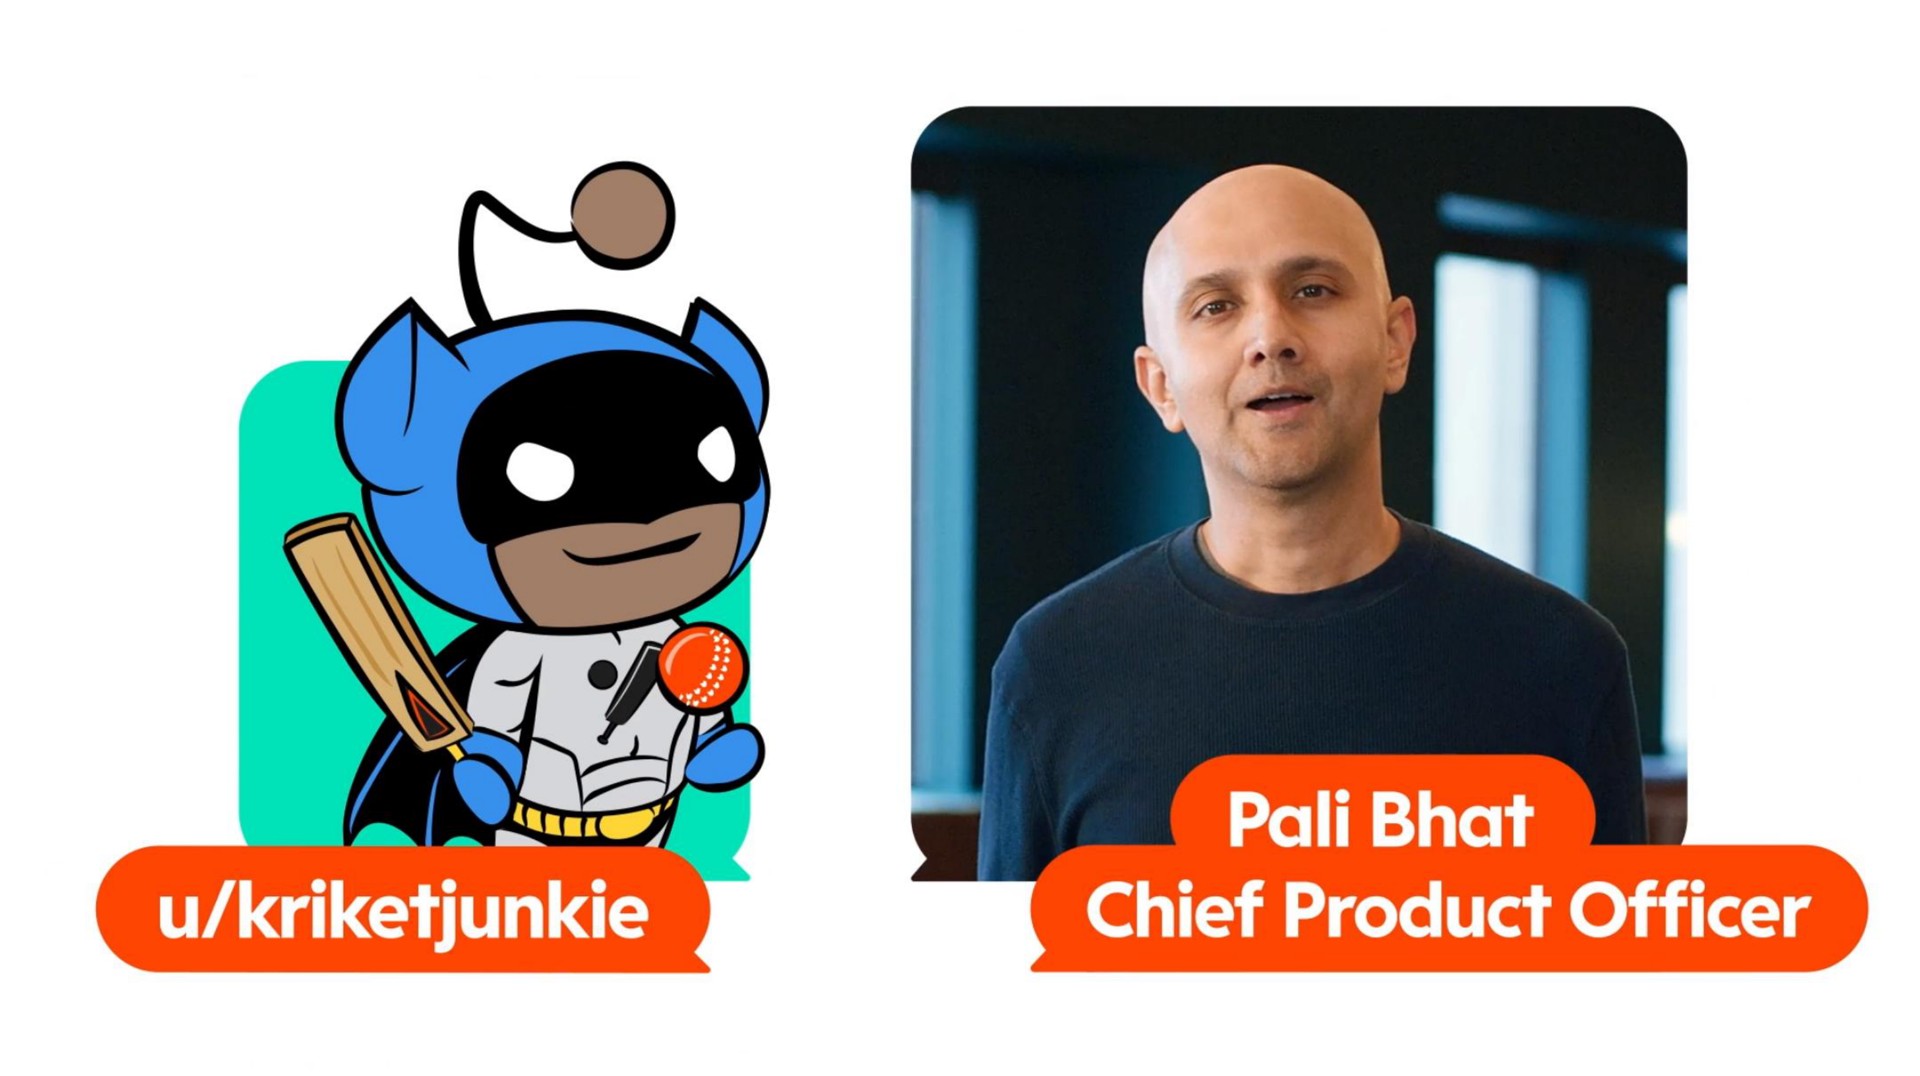 pali bhat chief product officer | Reddit